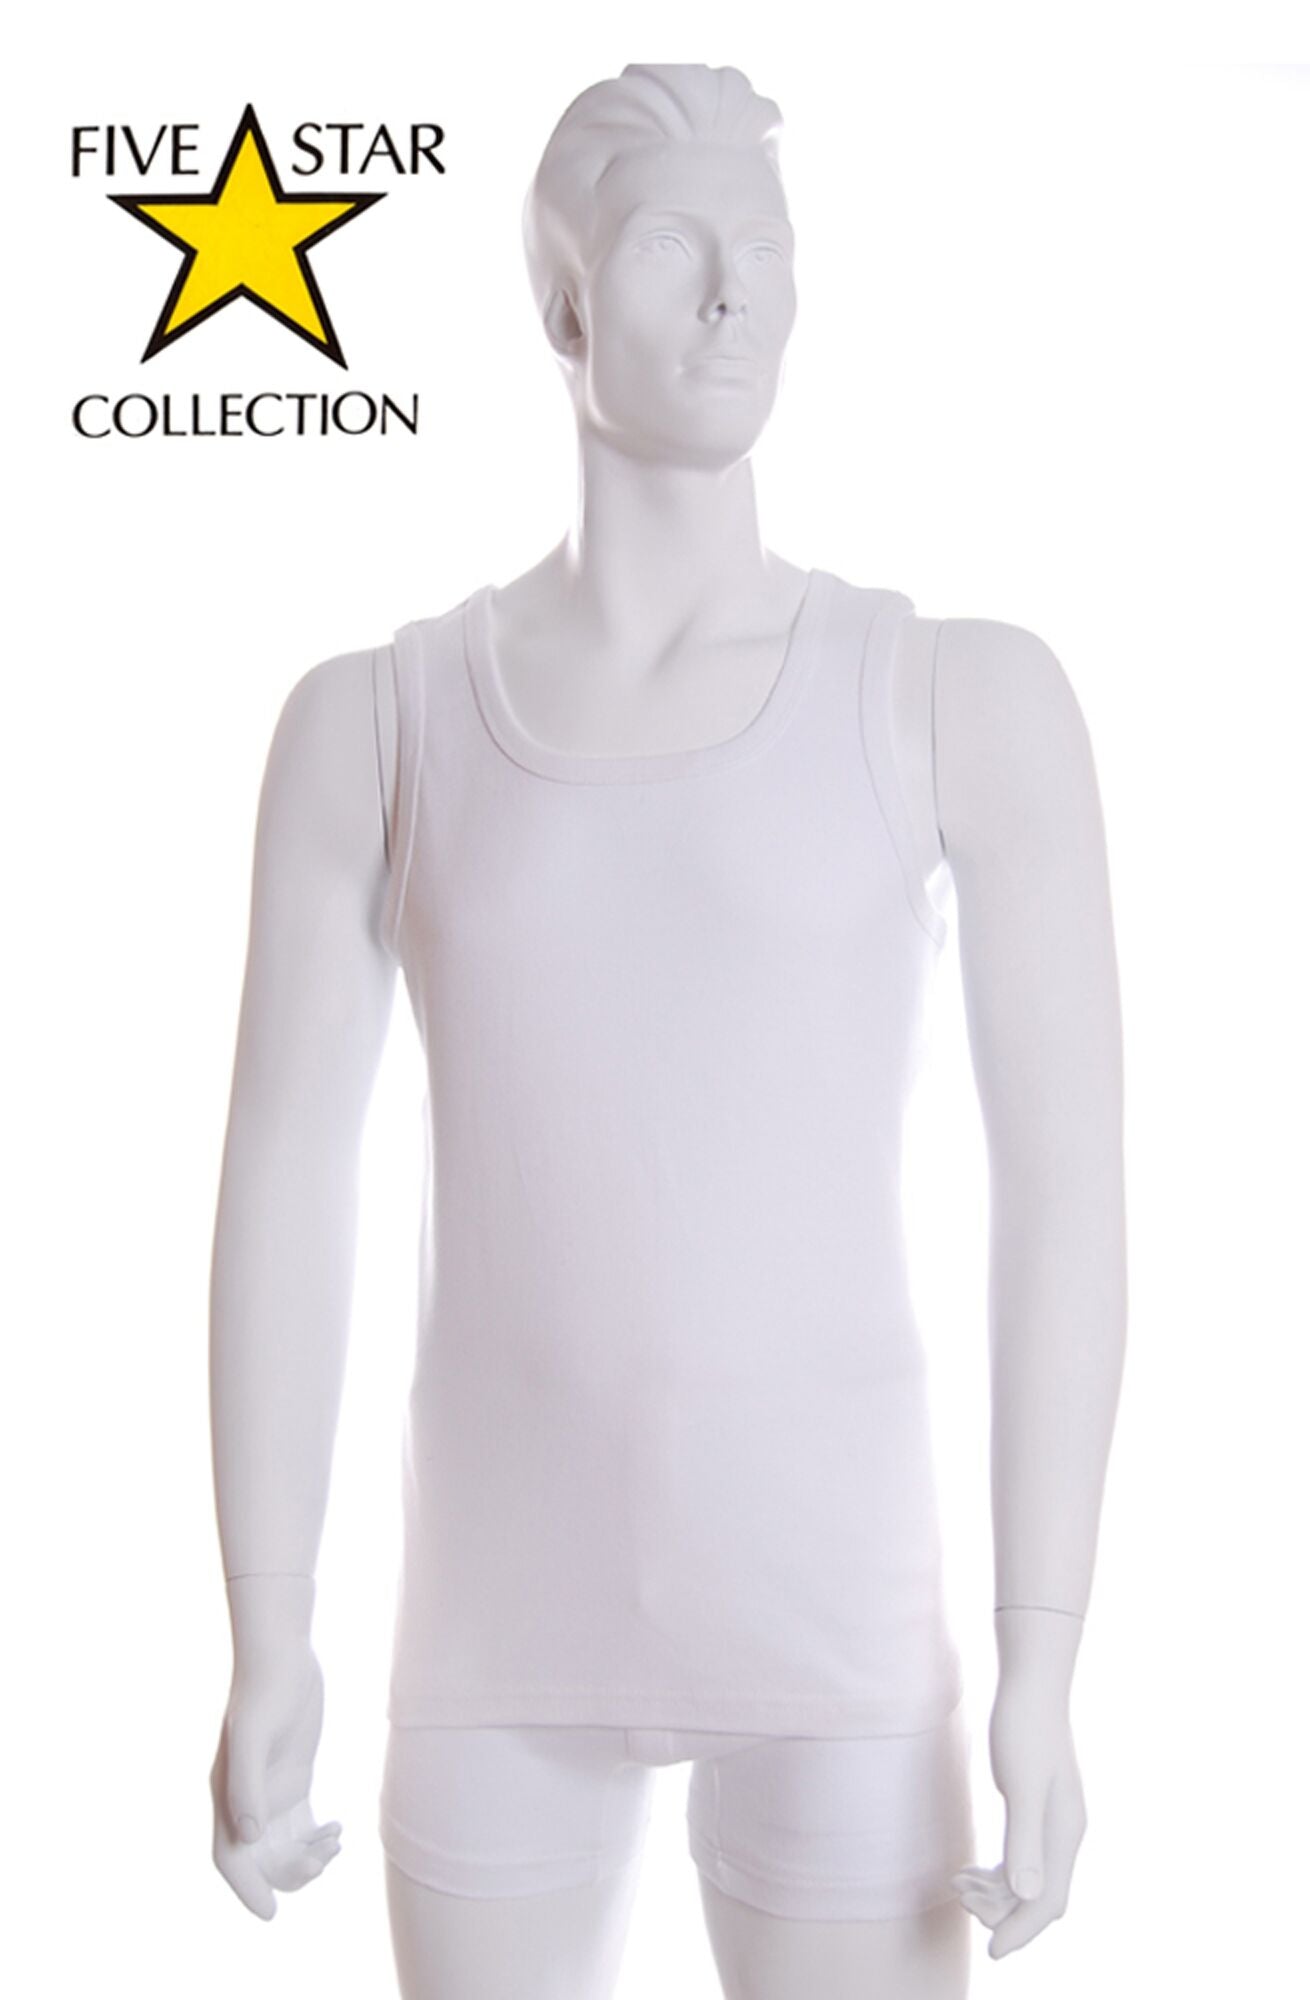 Mens 100% Cotton White Vests - 2 from £7.98